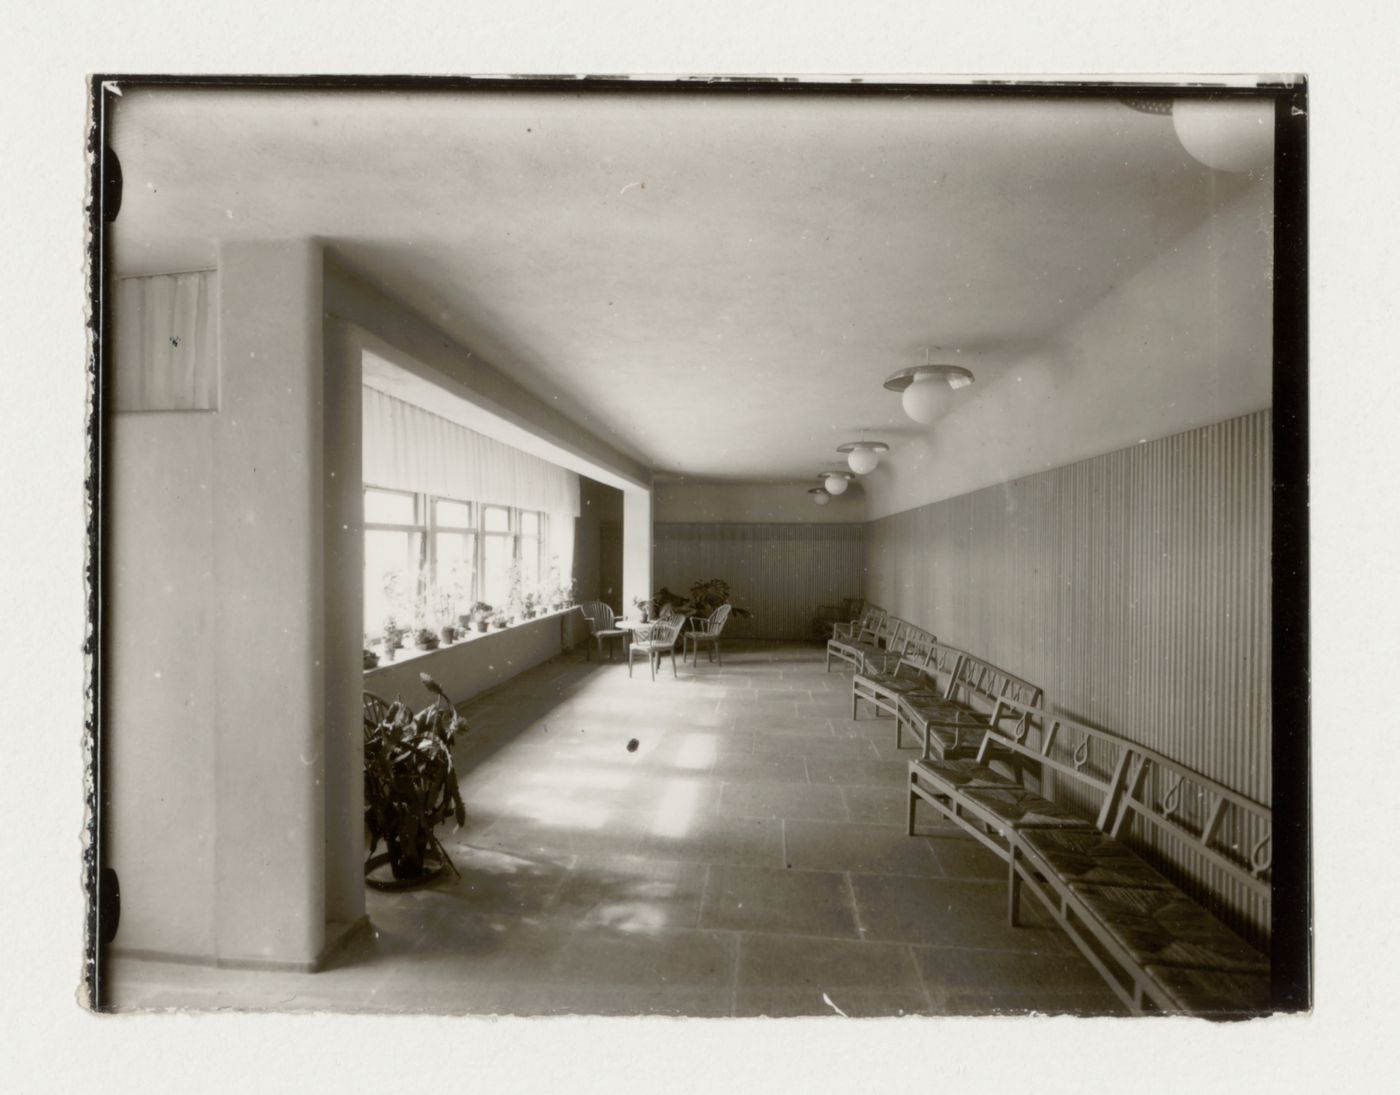 Interior view of the waiting room of the Chapel of the Holy Cross showing settles, a table and chairs, Woodland Crematorium and Cemetery, Stockholm